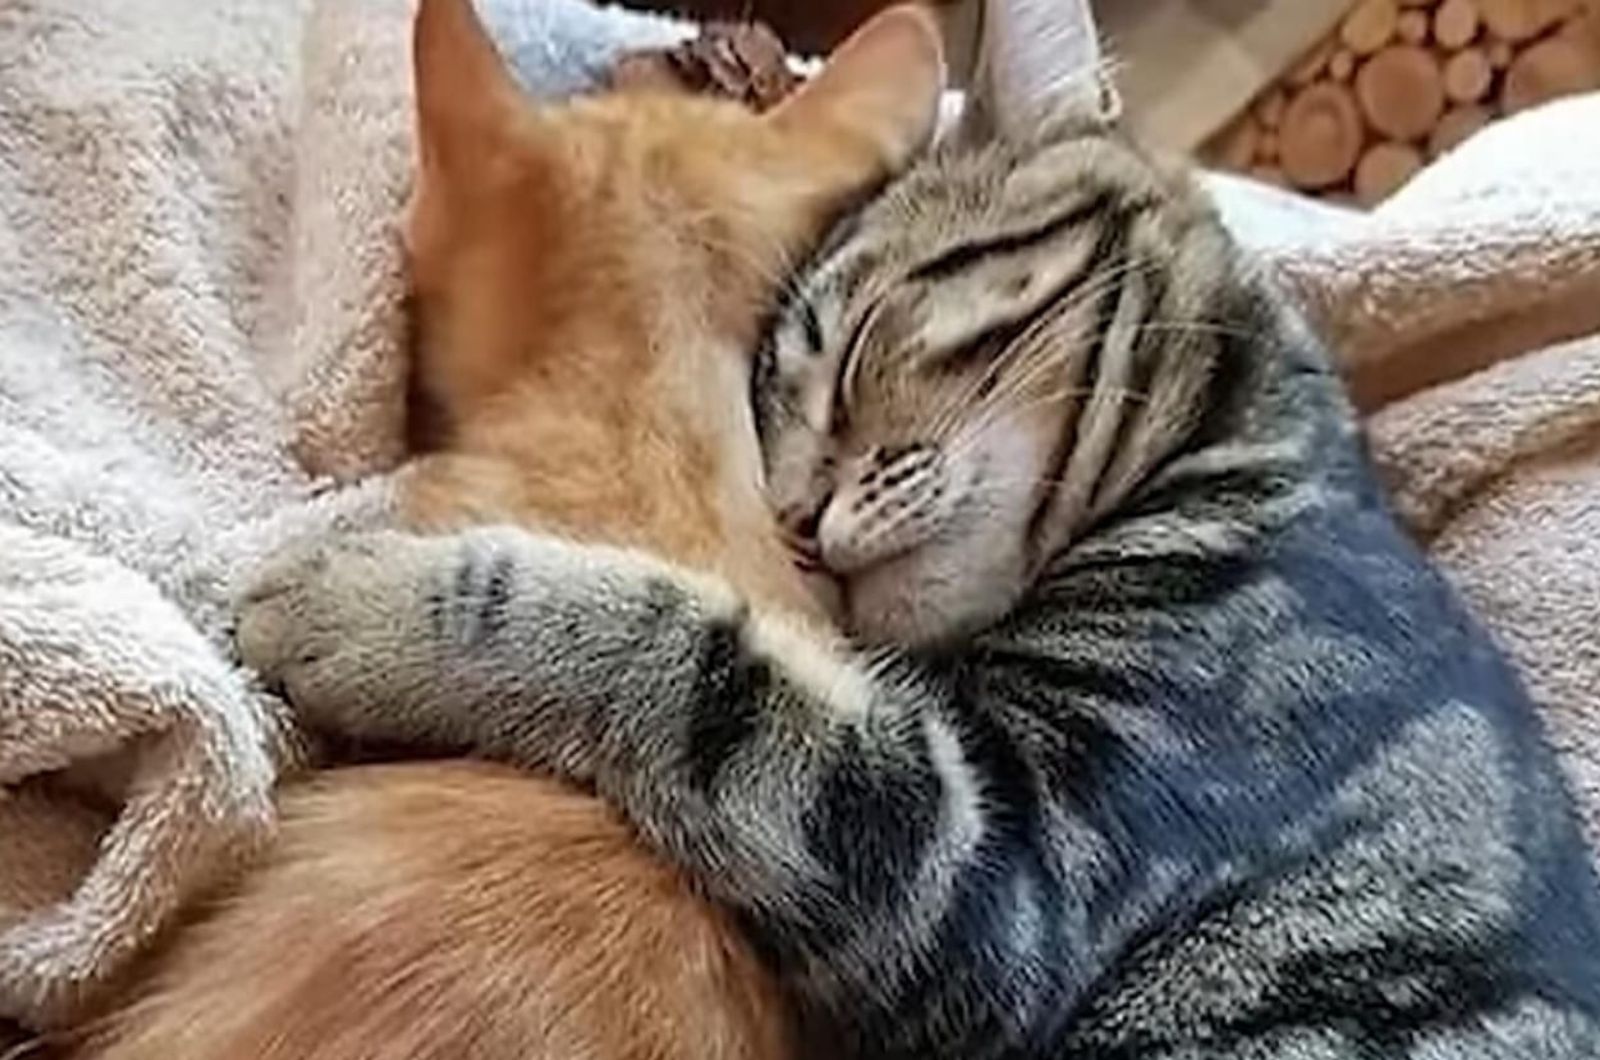 two shelter cats lying together